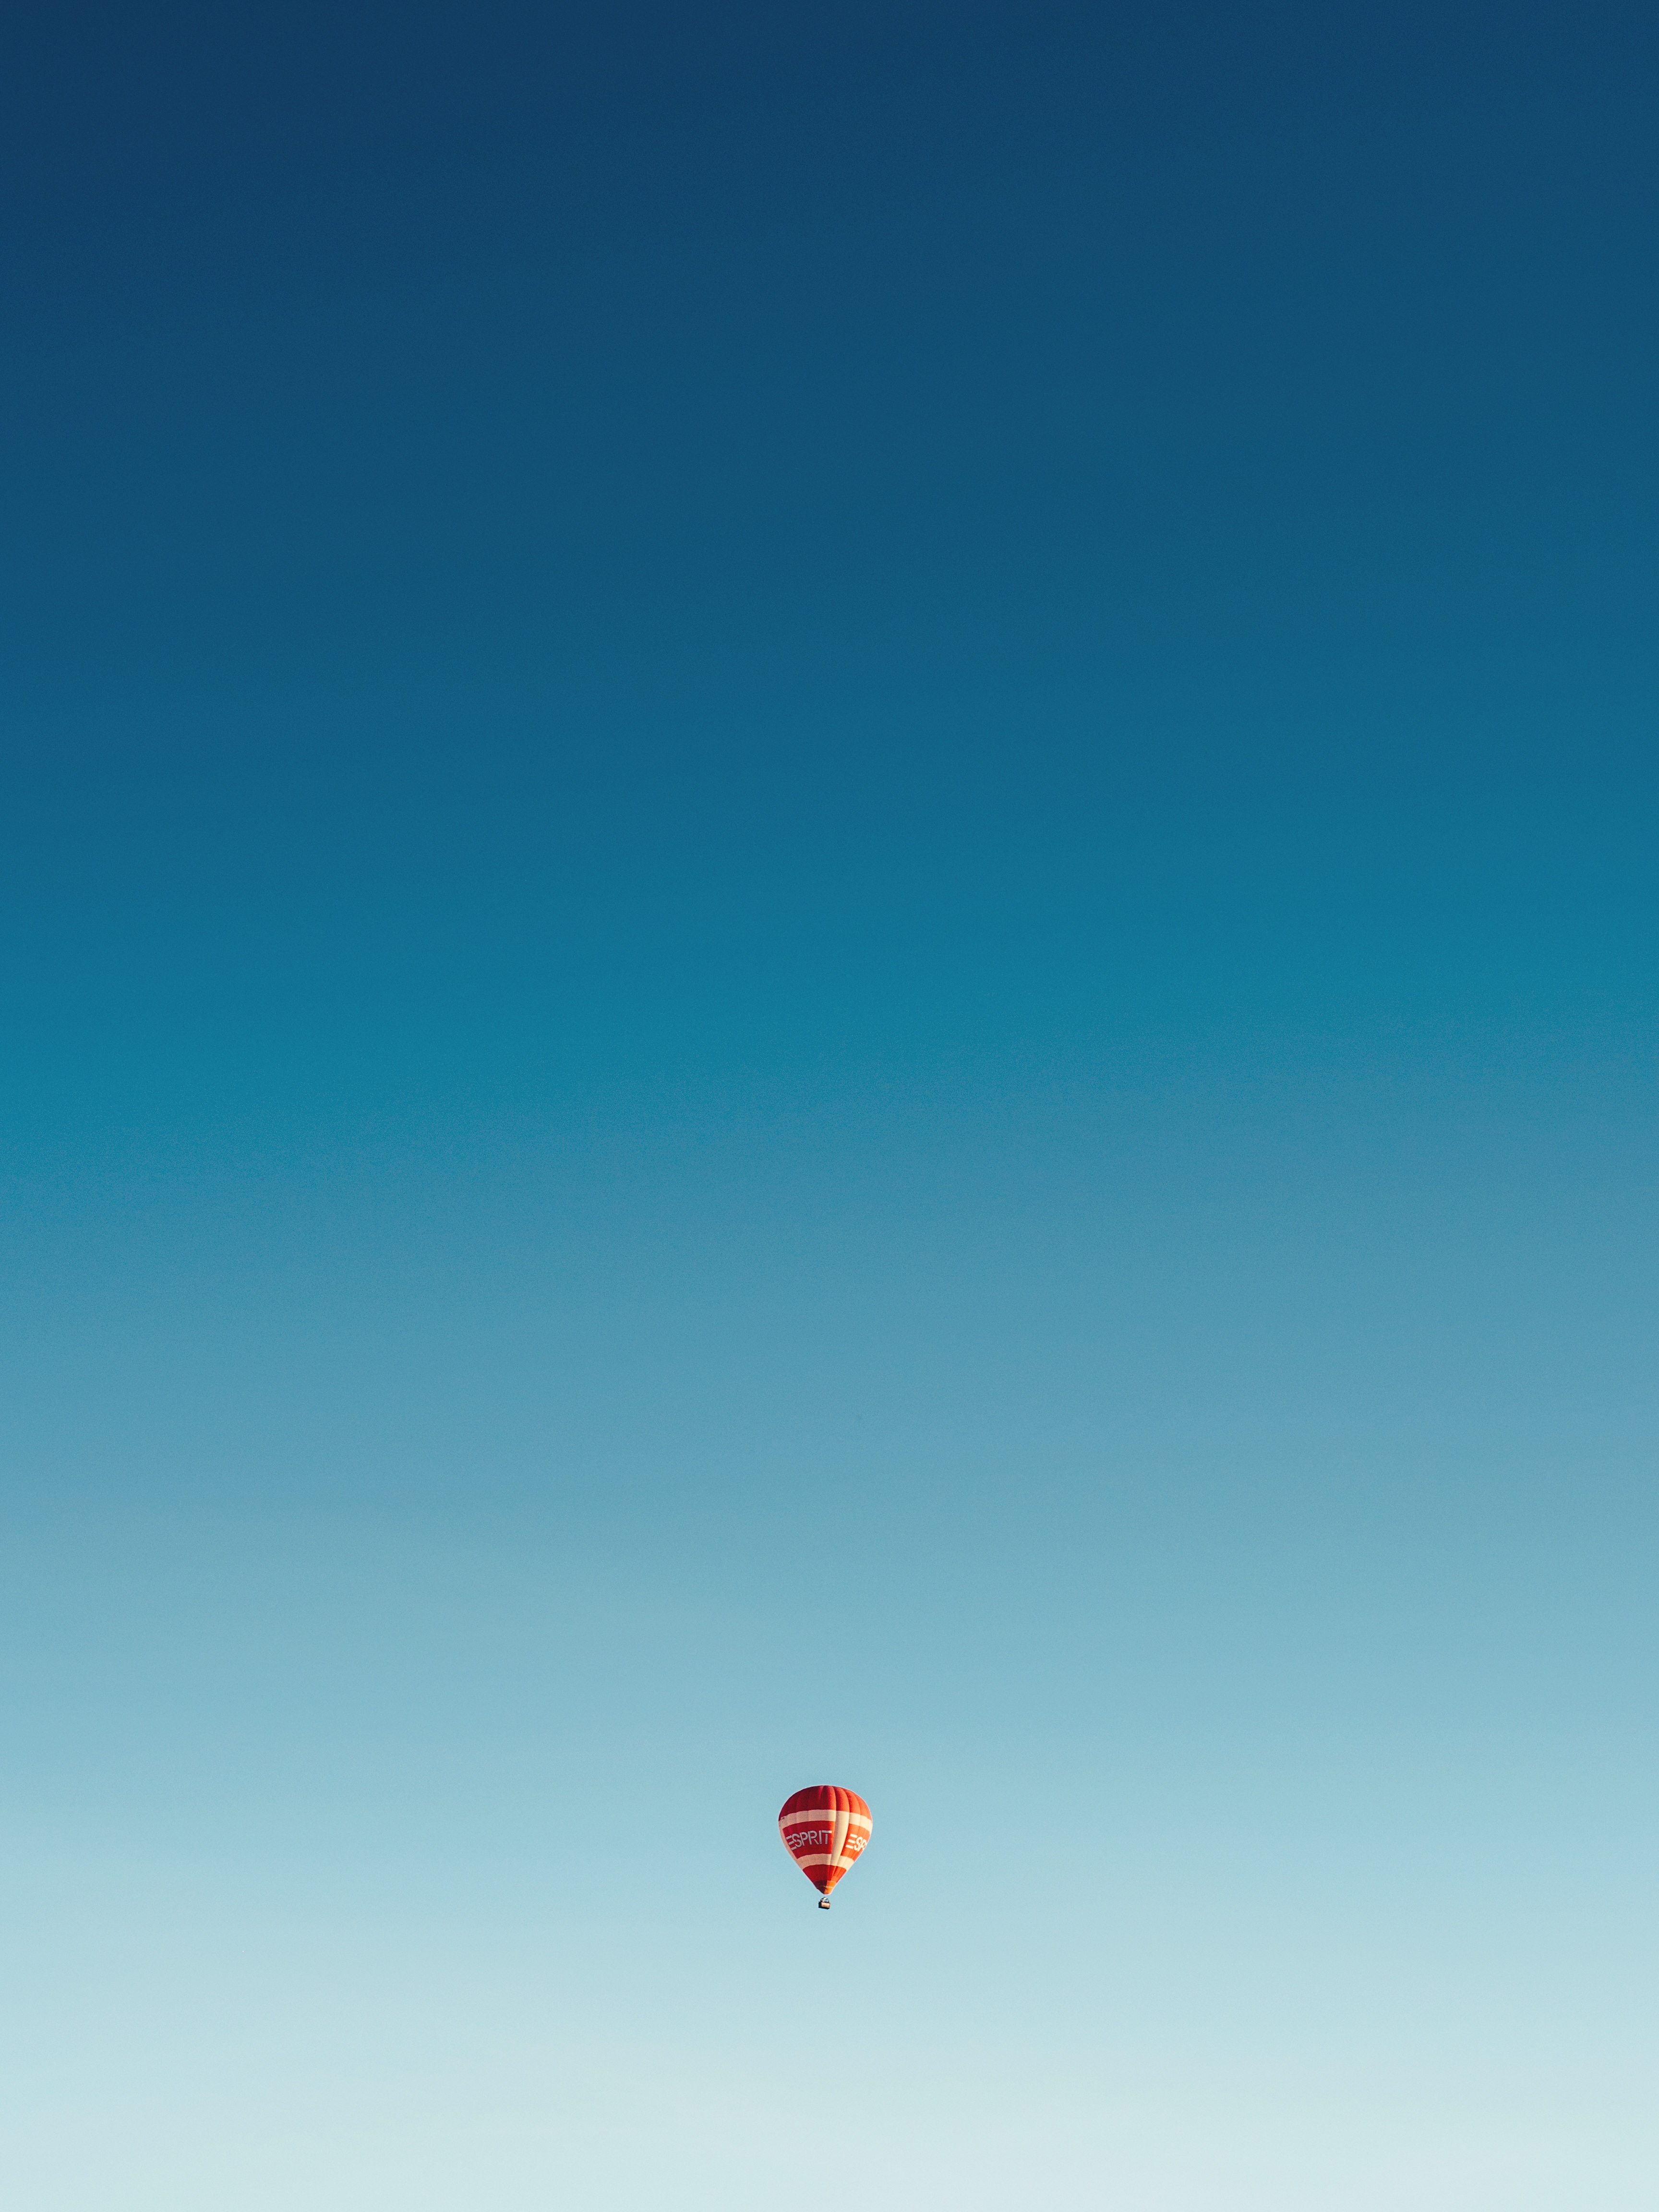 132688 free wallpaper 1080x2246 for phone, download images  1080x2246 for mobile